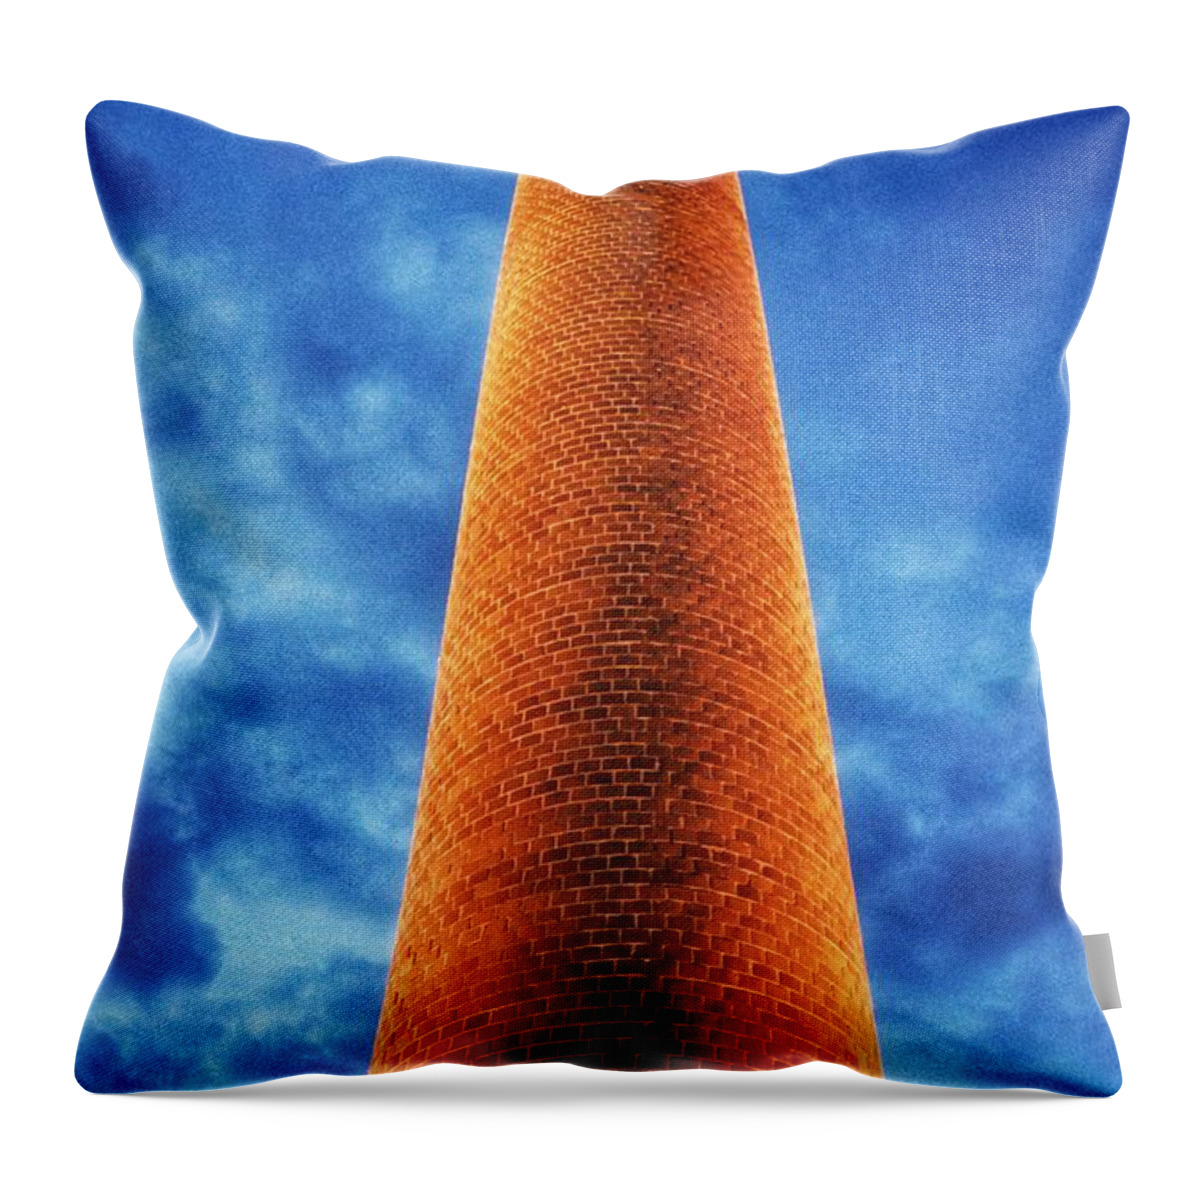 Photo Throw Pillow featuring the photograph Homestead Stacks 1 by Evan Foster